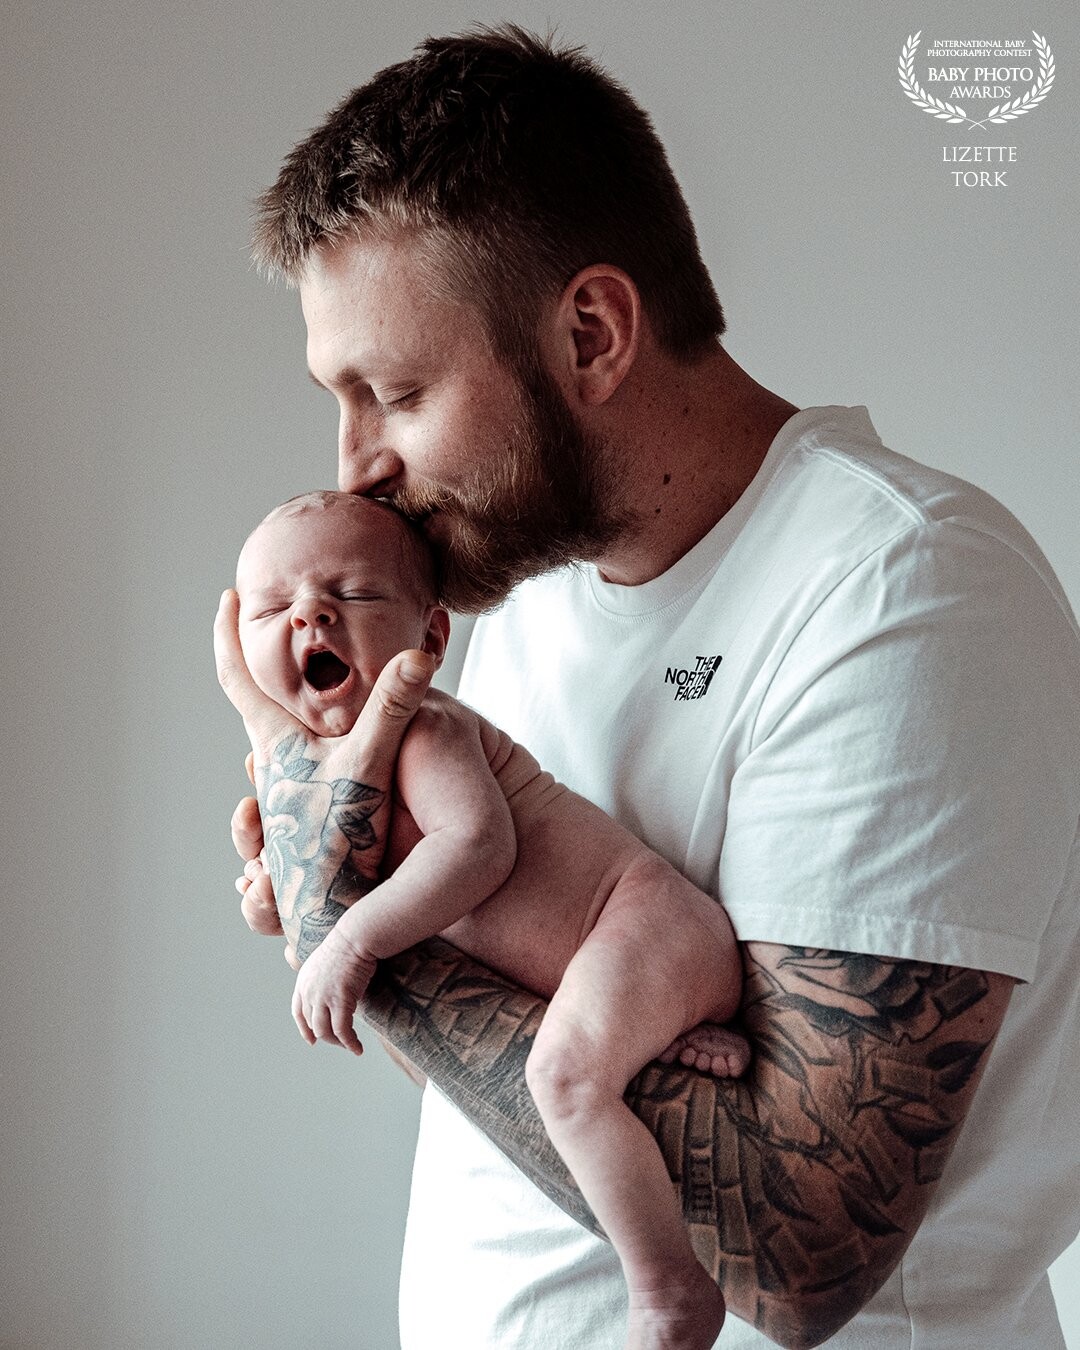 I usually focus on mothers with their newborn babies. Often I eventually get the father to participate in the lifestyle shoot. This picture is a perfect capture of this tough father who is super proud of his son. I am very proud of this photo!